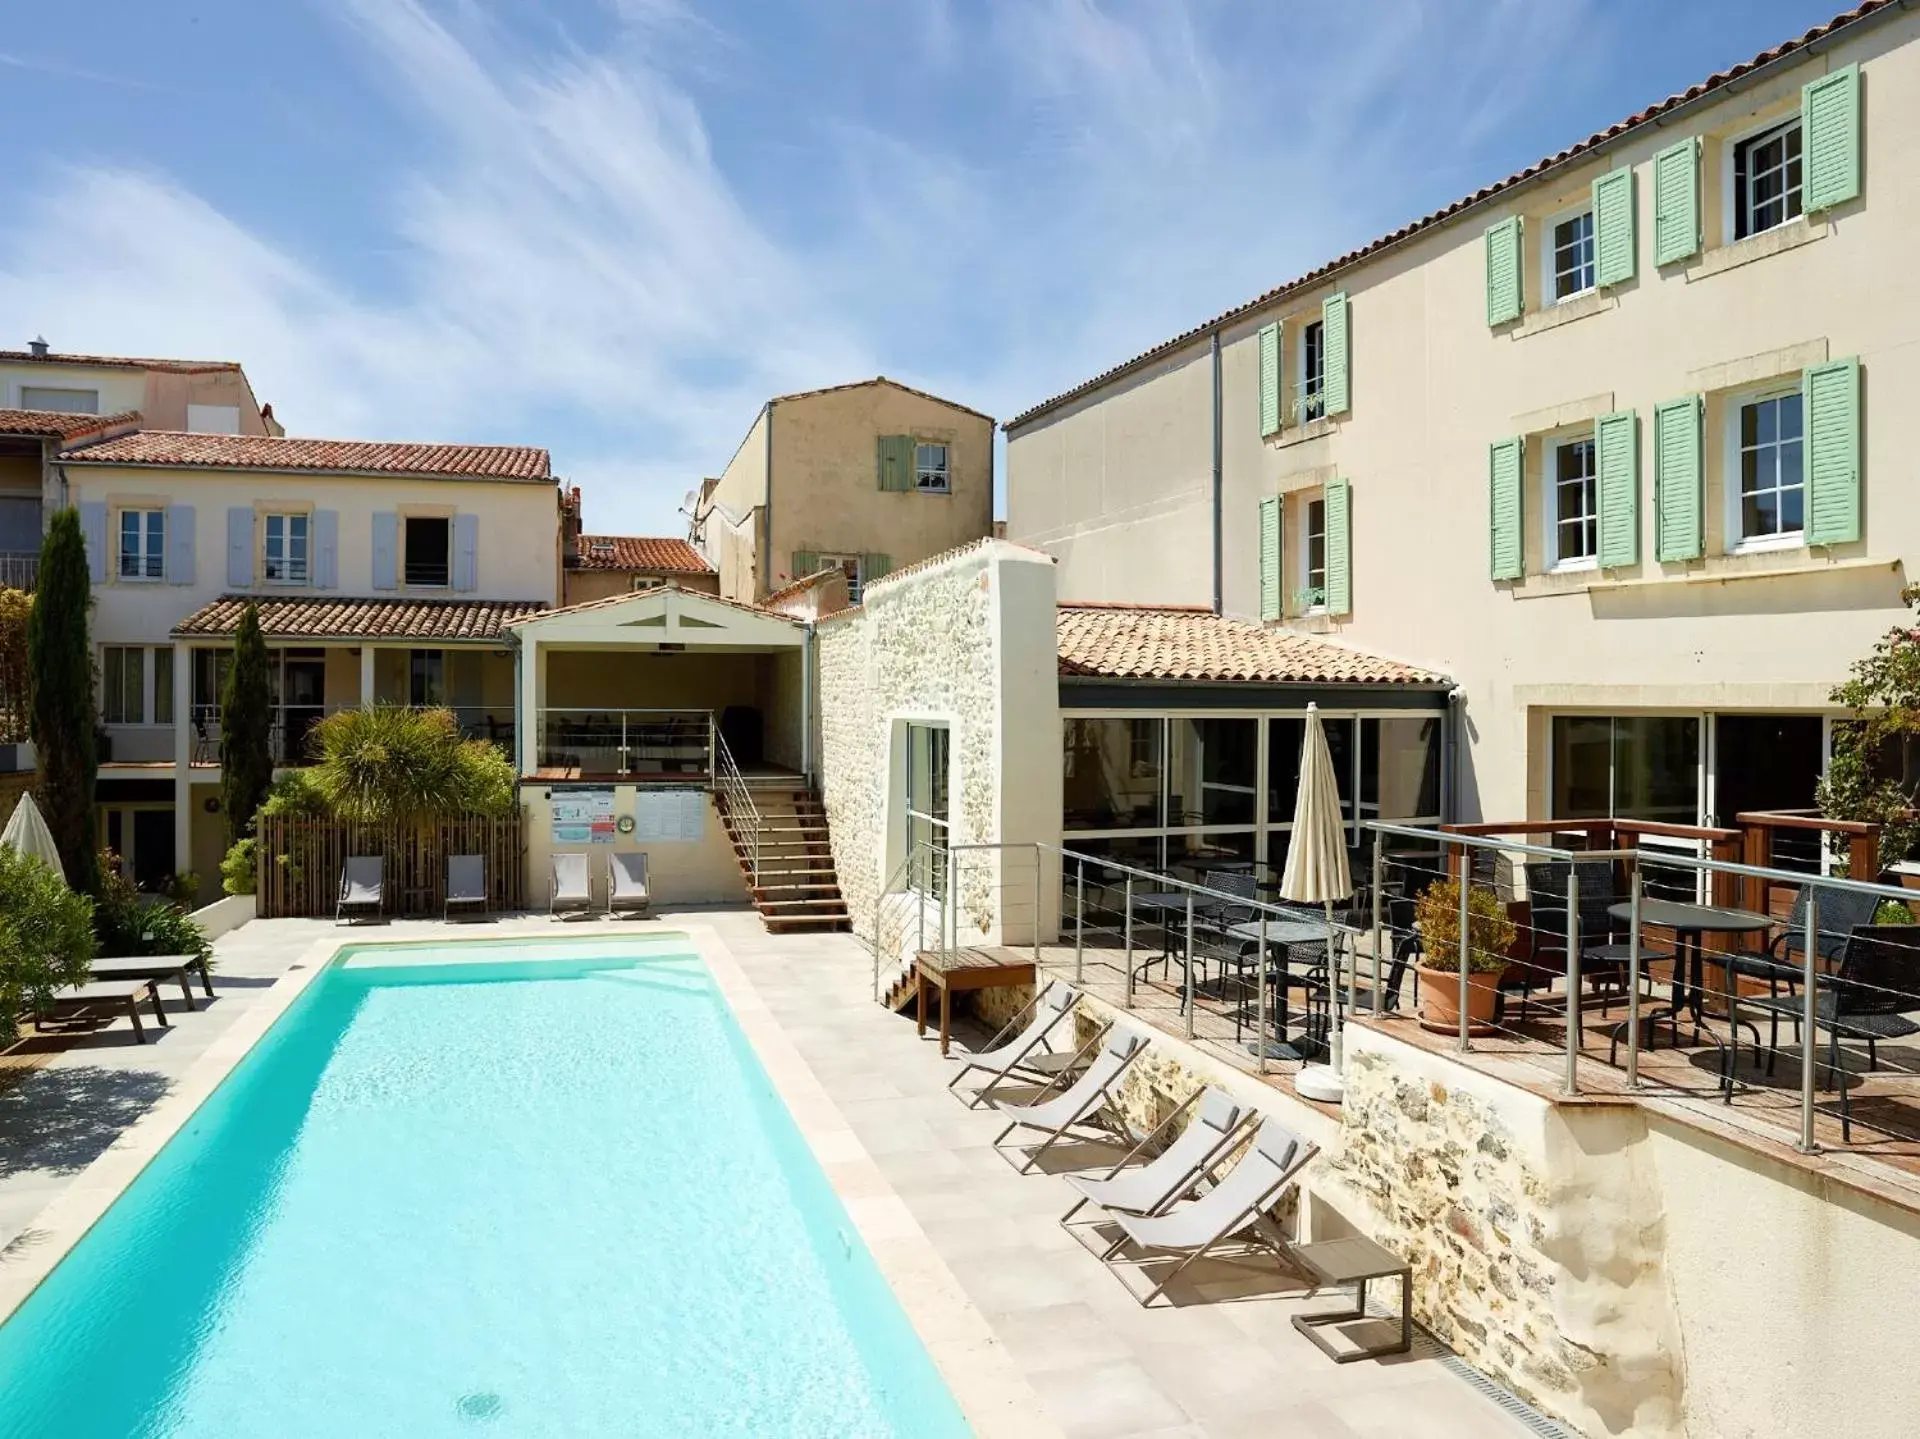 Property building, Swimming Pool in Hôtel Le Galion